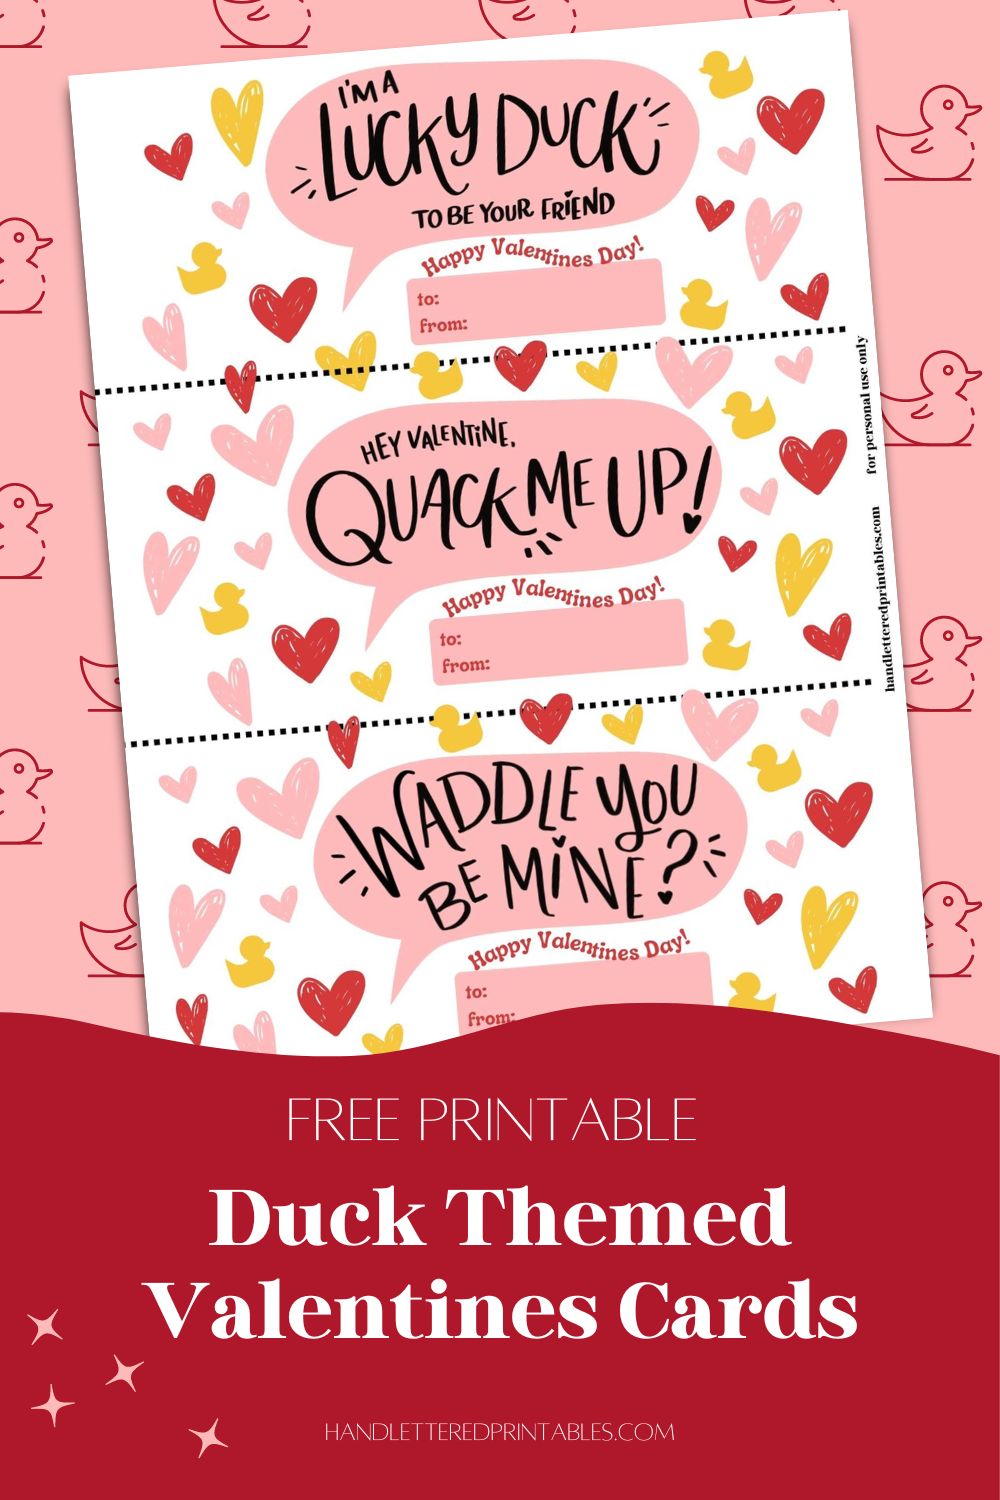 duck themed printable valentines day cards. cards shown read: waddle you be mine, hey valentine you quack me up and lucky to be your friend- all with a small happy valentines day. text over reads: free printable duck themed valentines cards